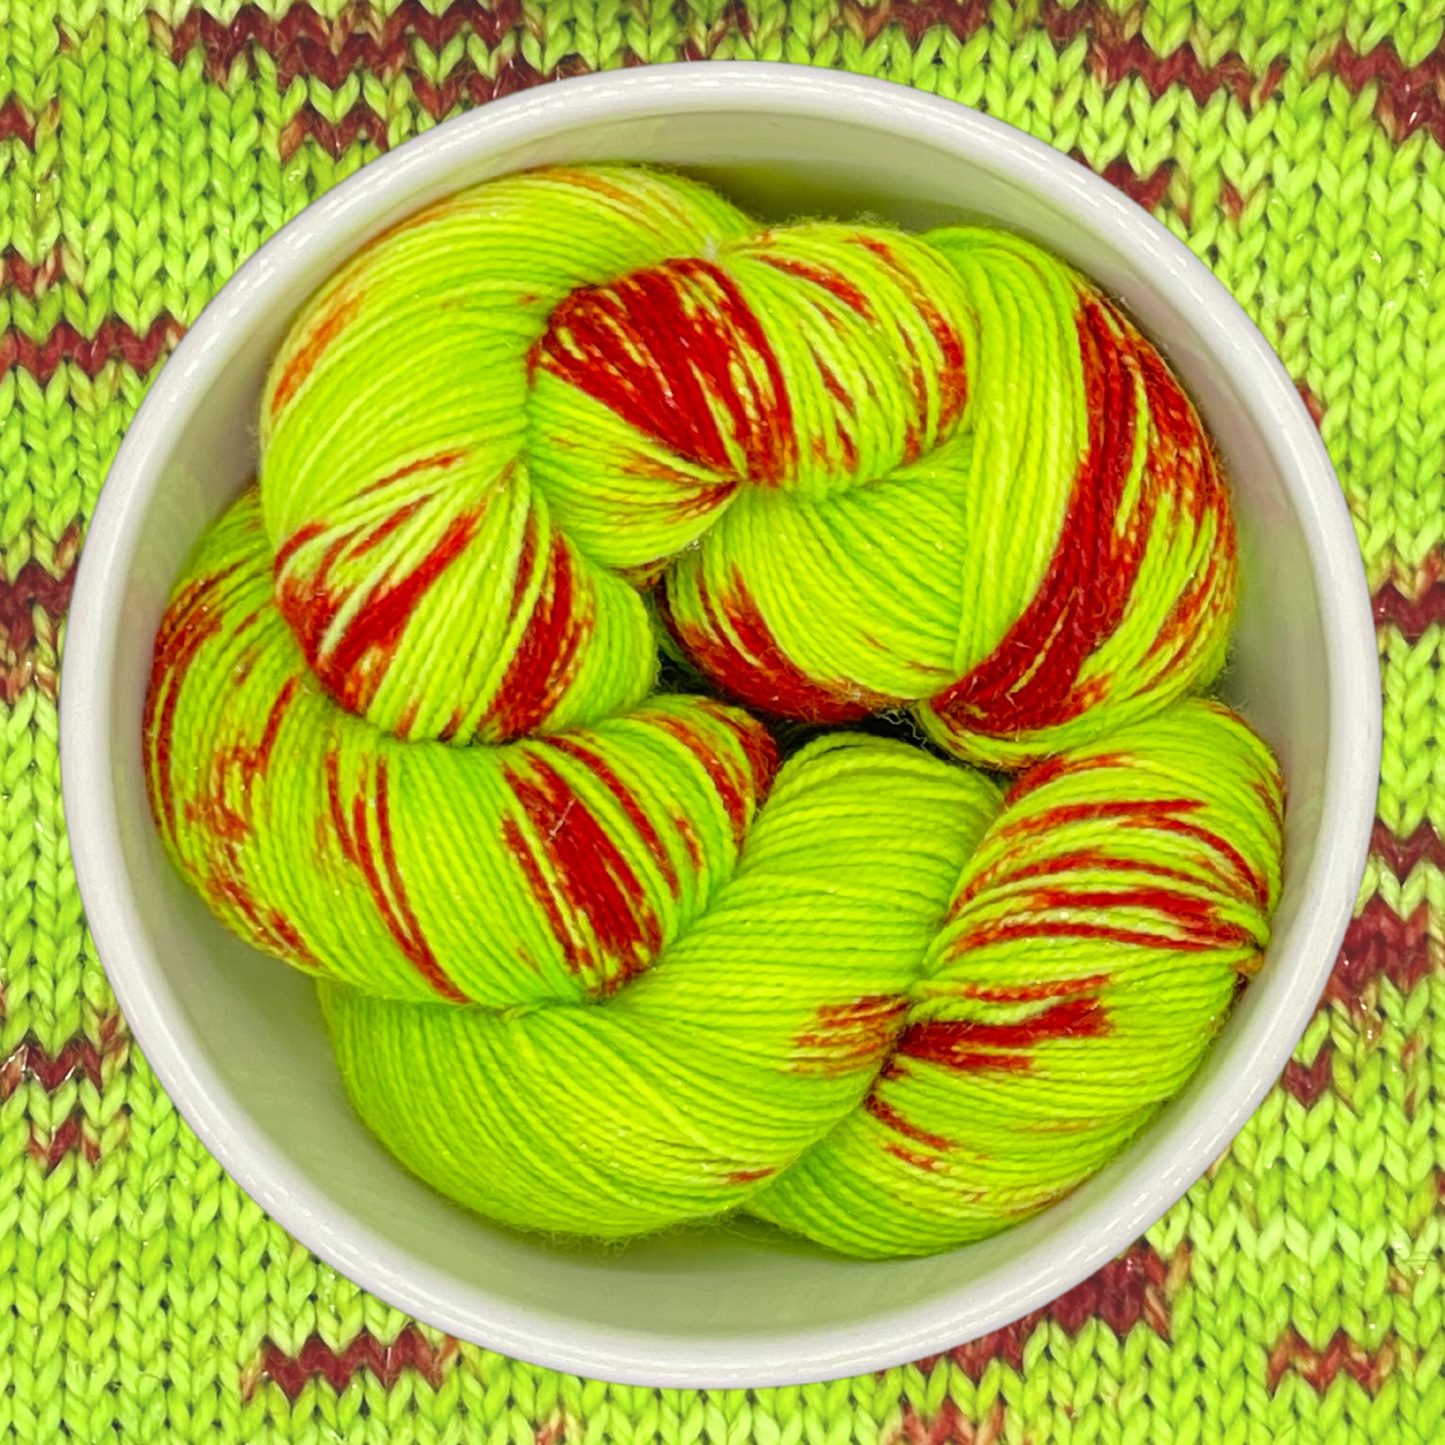 Mr. Grinch - A variegated hand dyed yarn